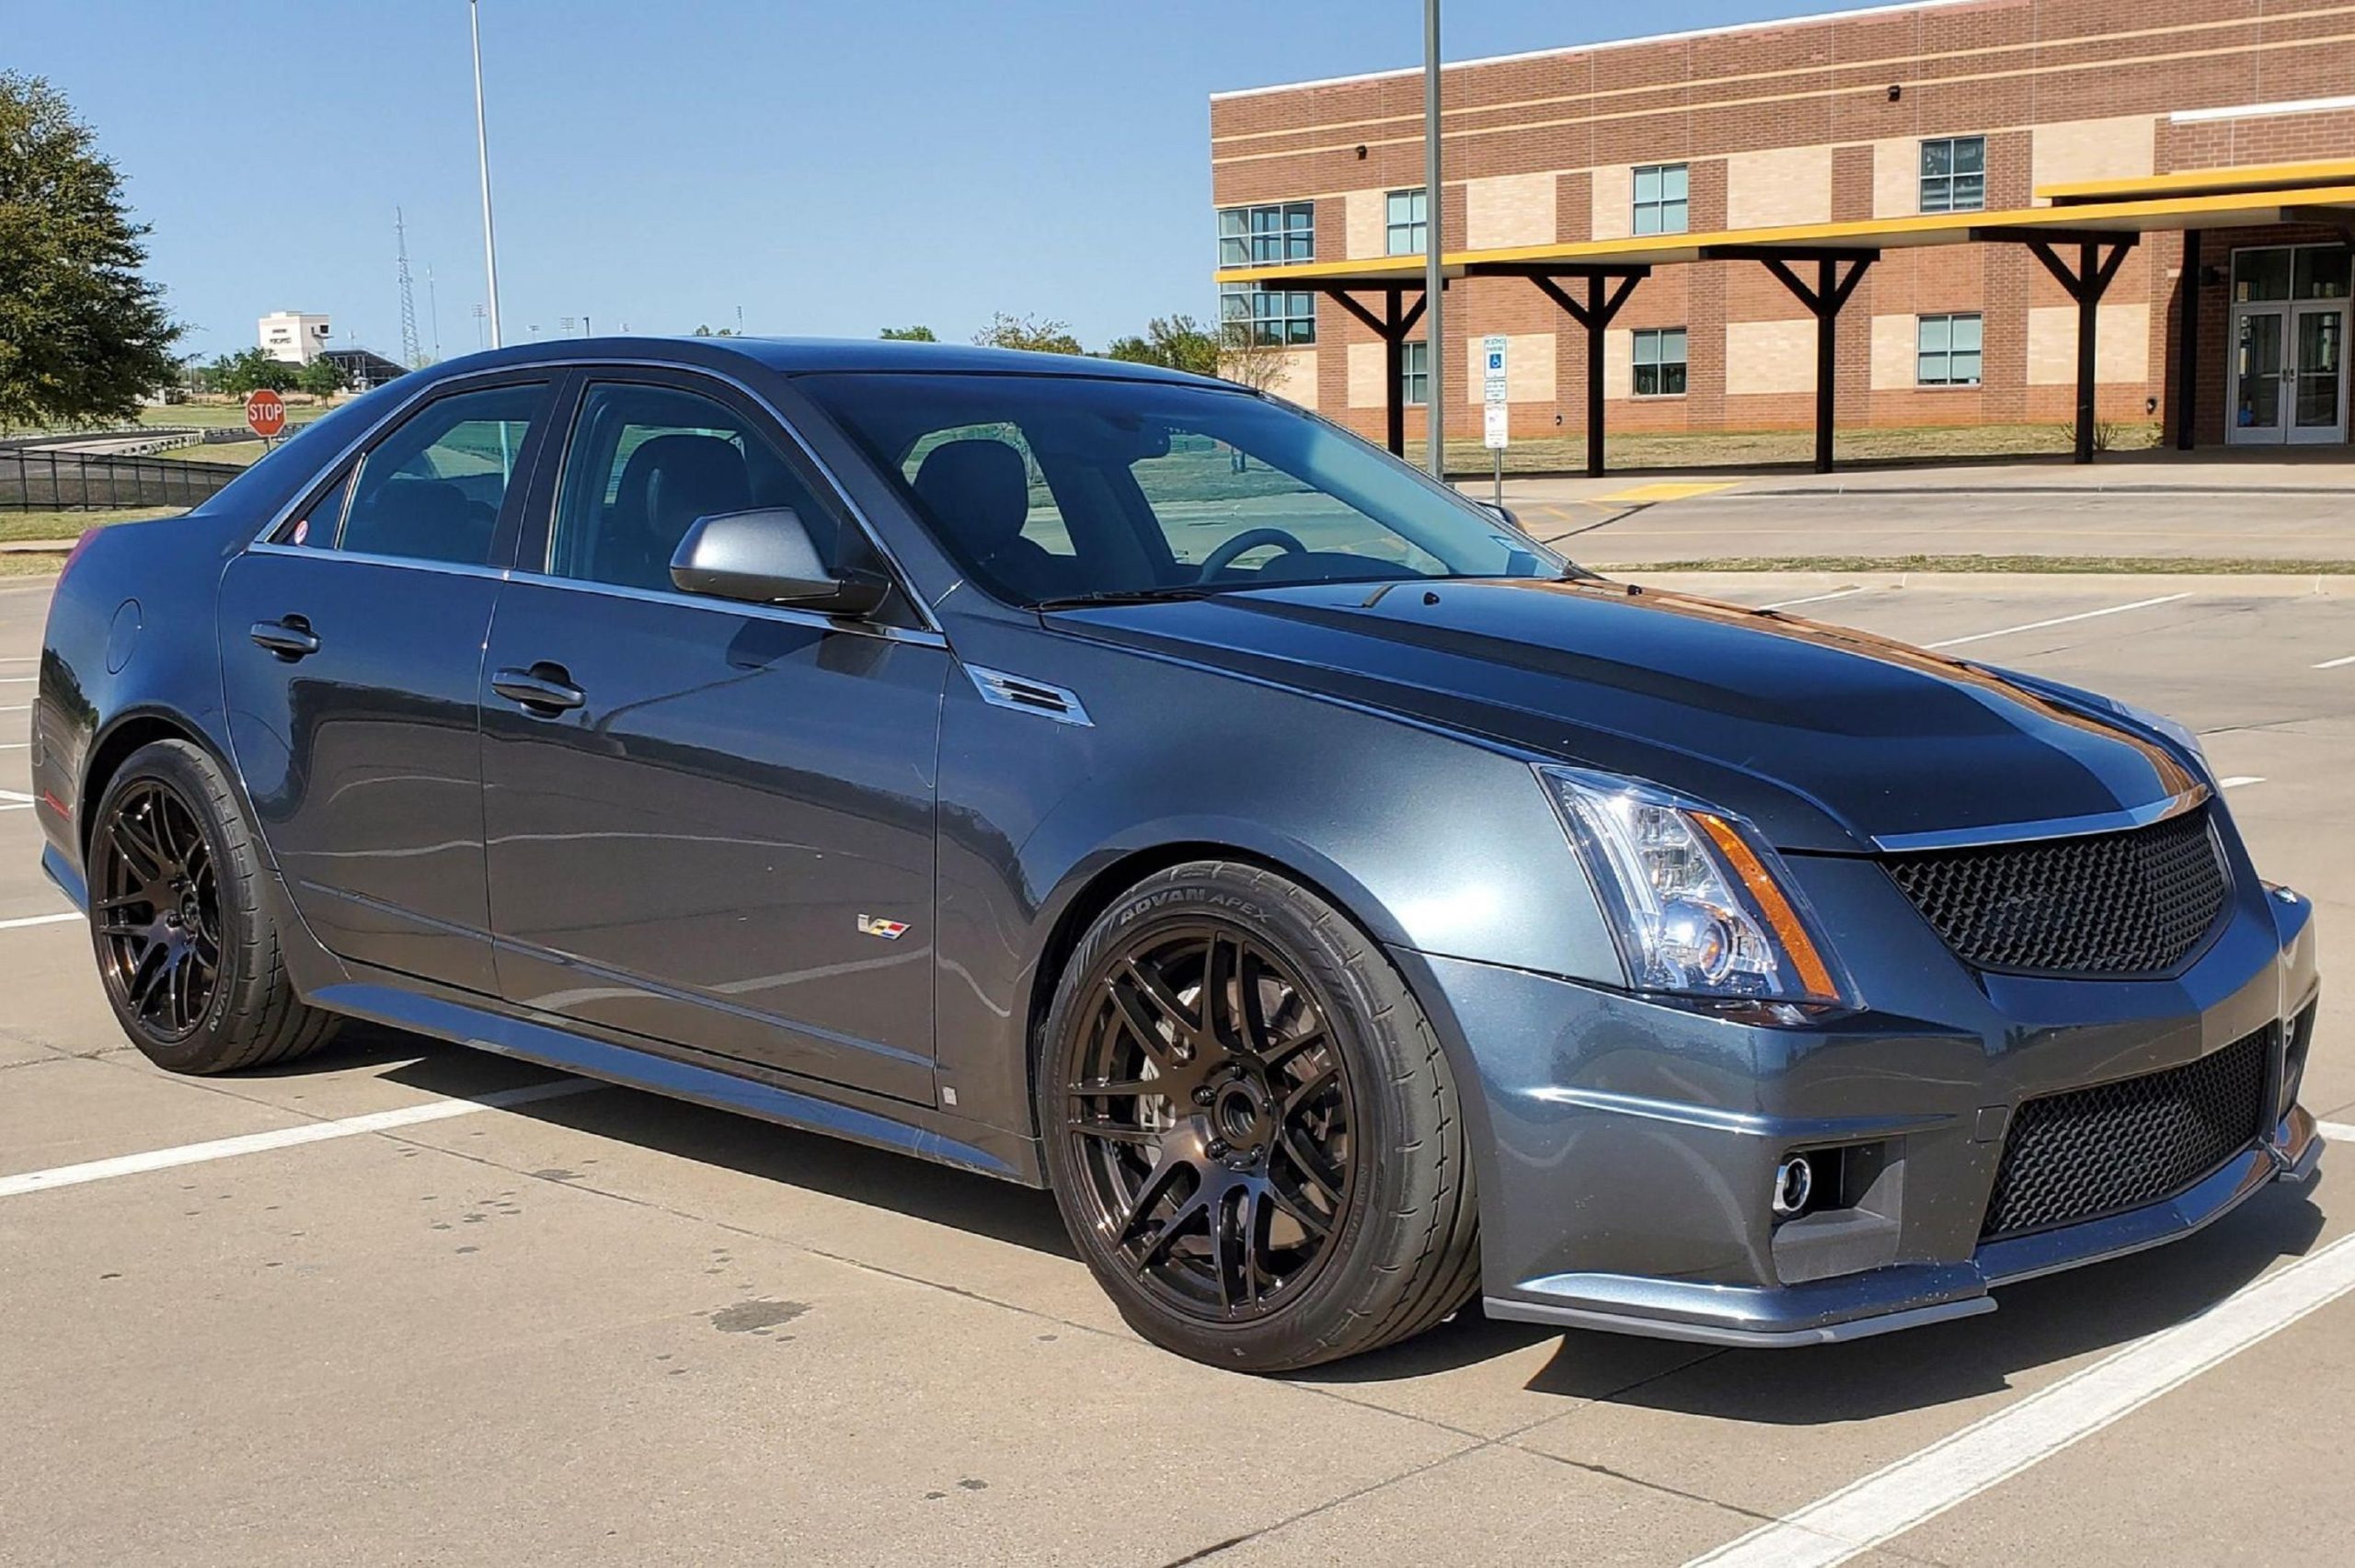 A modified gray 2009 Cadillac CTS-V Sedan in a school parking lot